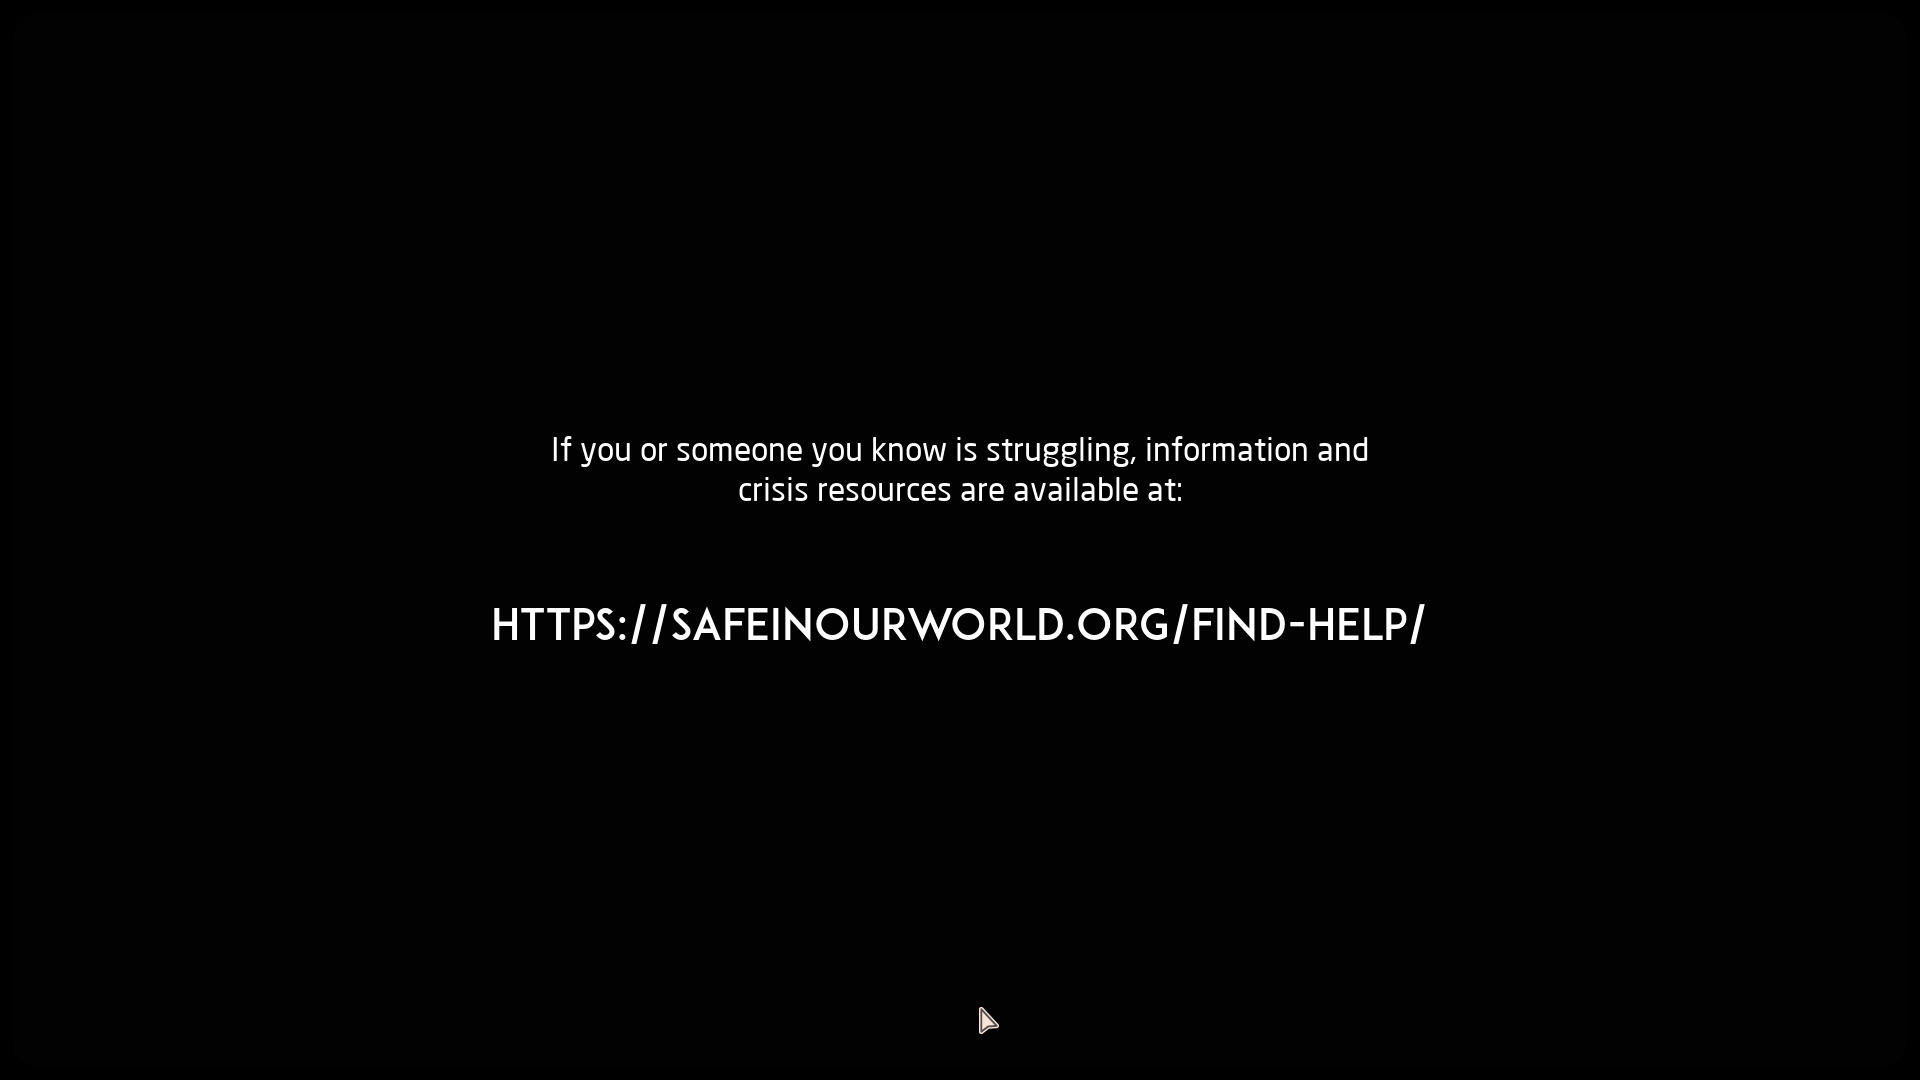 A screenshot of the support page from the organization Safe In Our World. The text on screen reads: if you or someone you know is struggling, information and crisis resources are available at safe in our world dot com forward slash find dash help forward slash